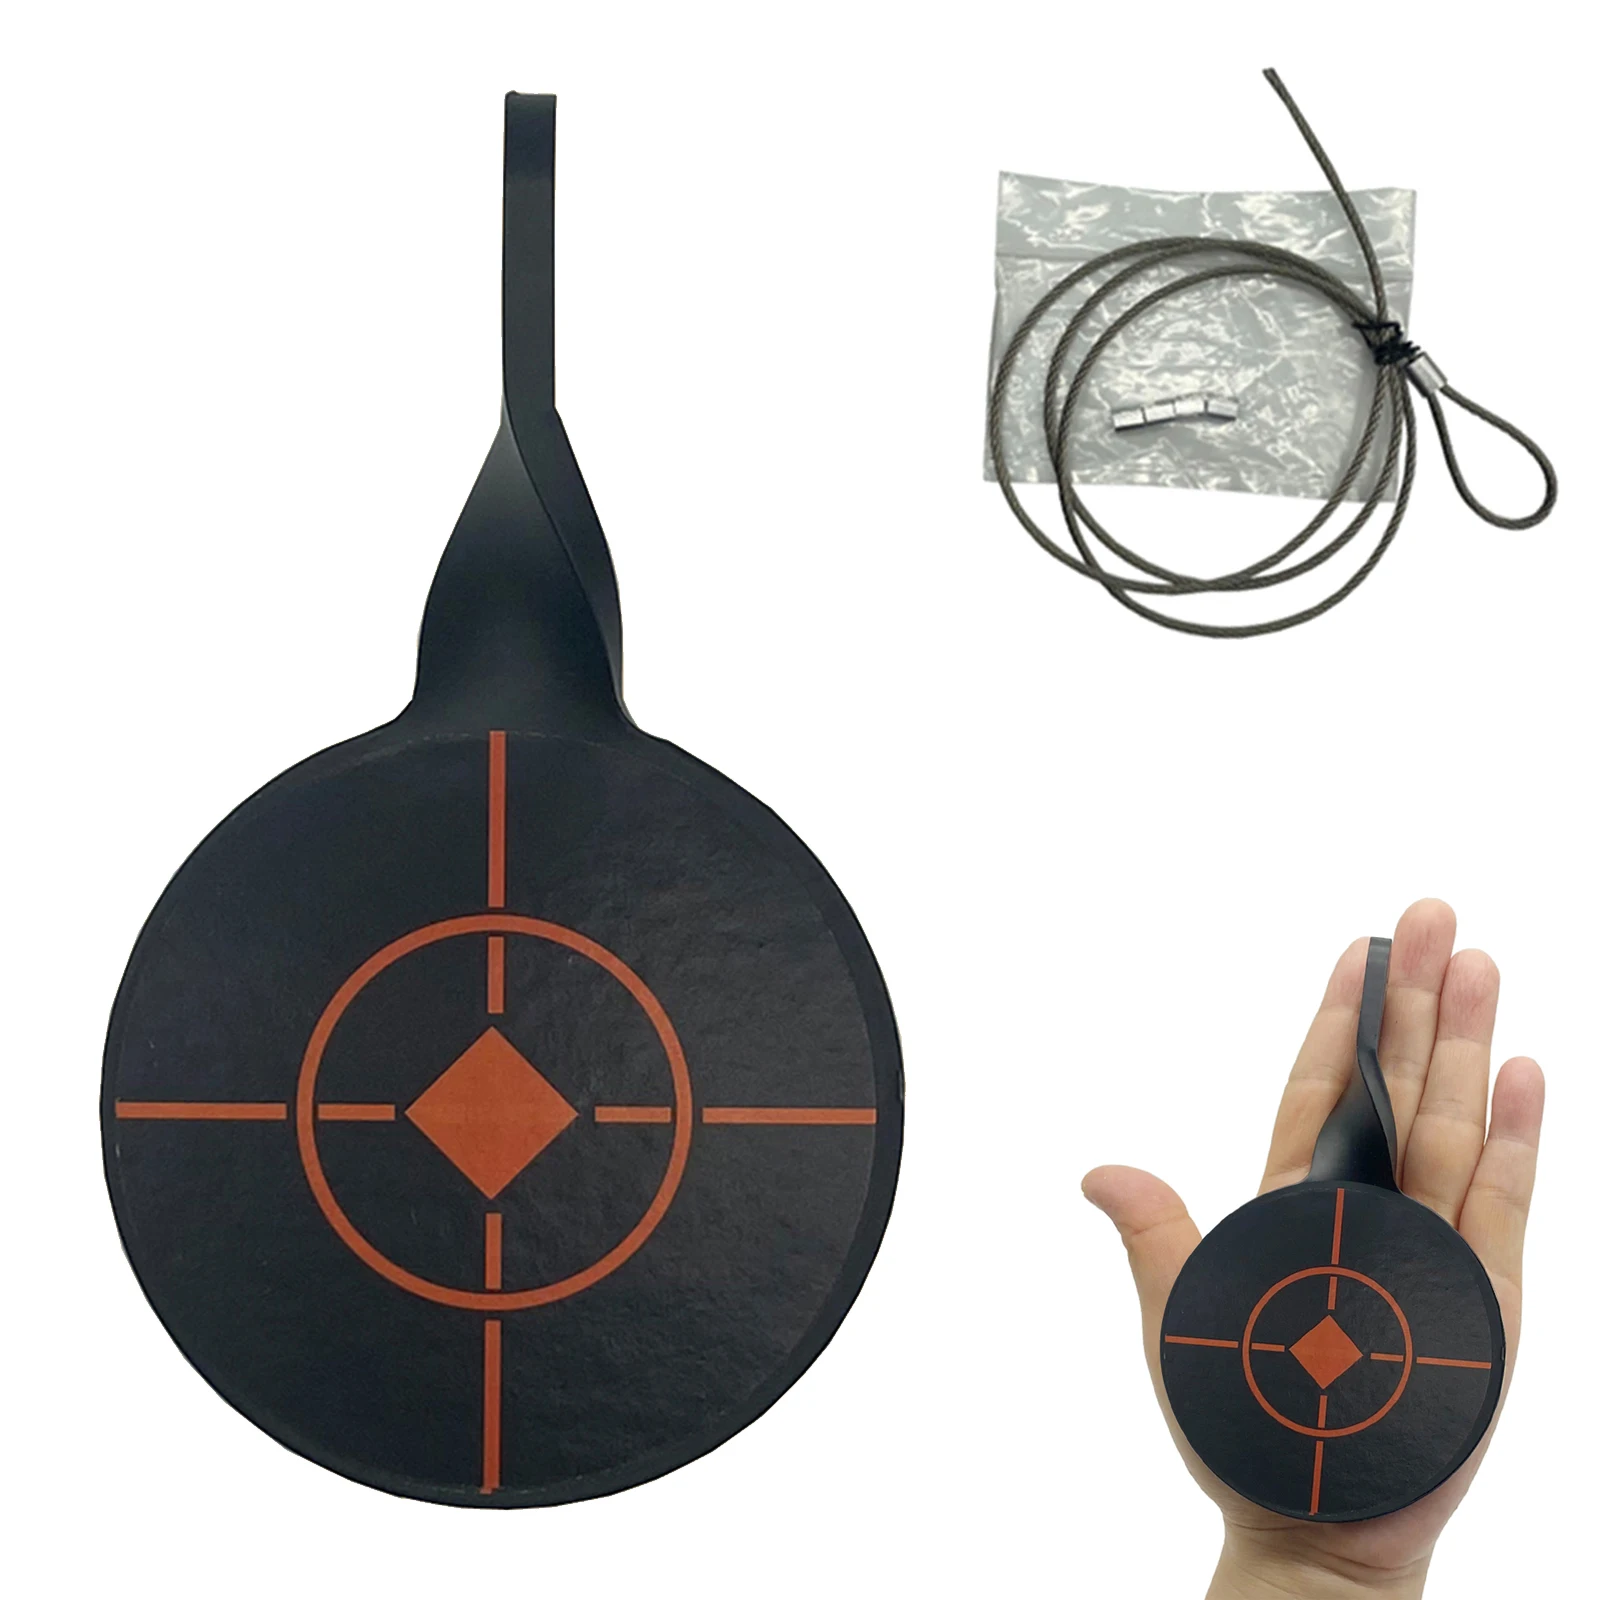 Diameter 8cm Shooting Target Stainless Steel Targets Hunting Catapult Paintball Archery Bow Training Target Hunting Accessories